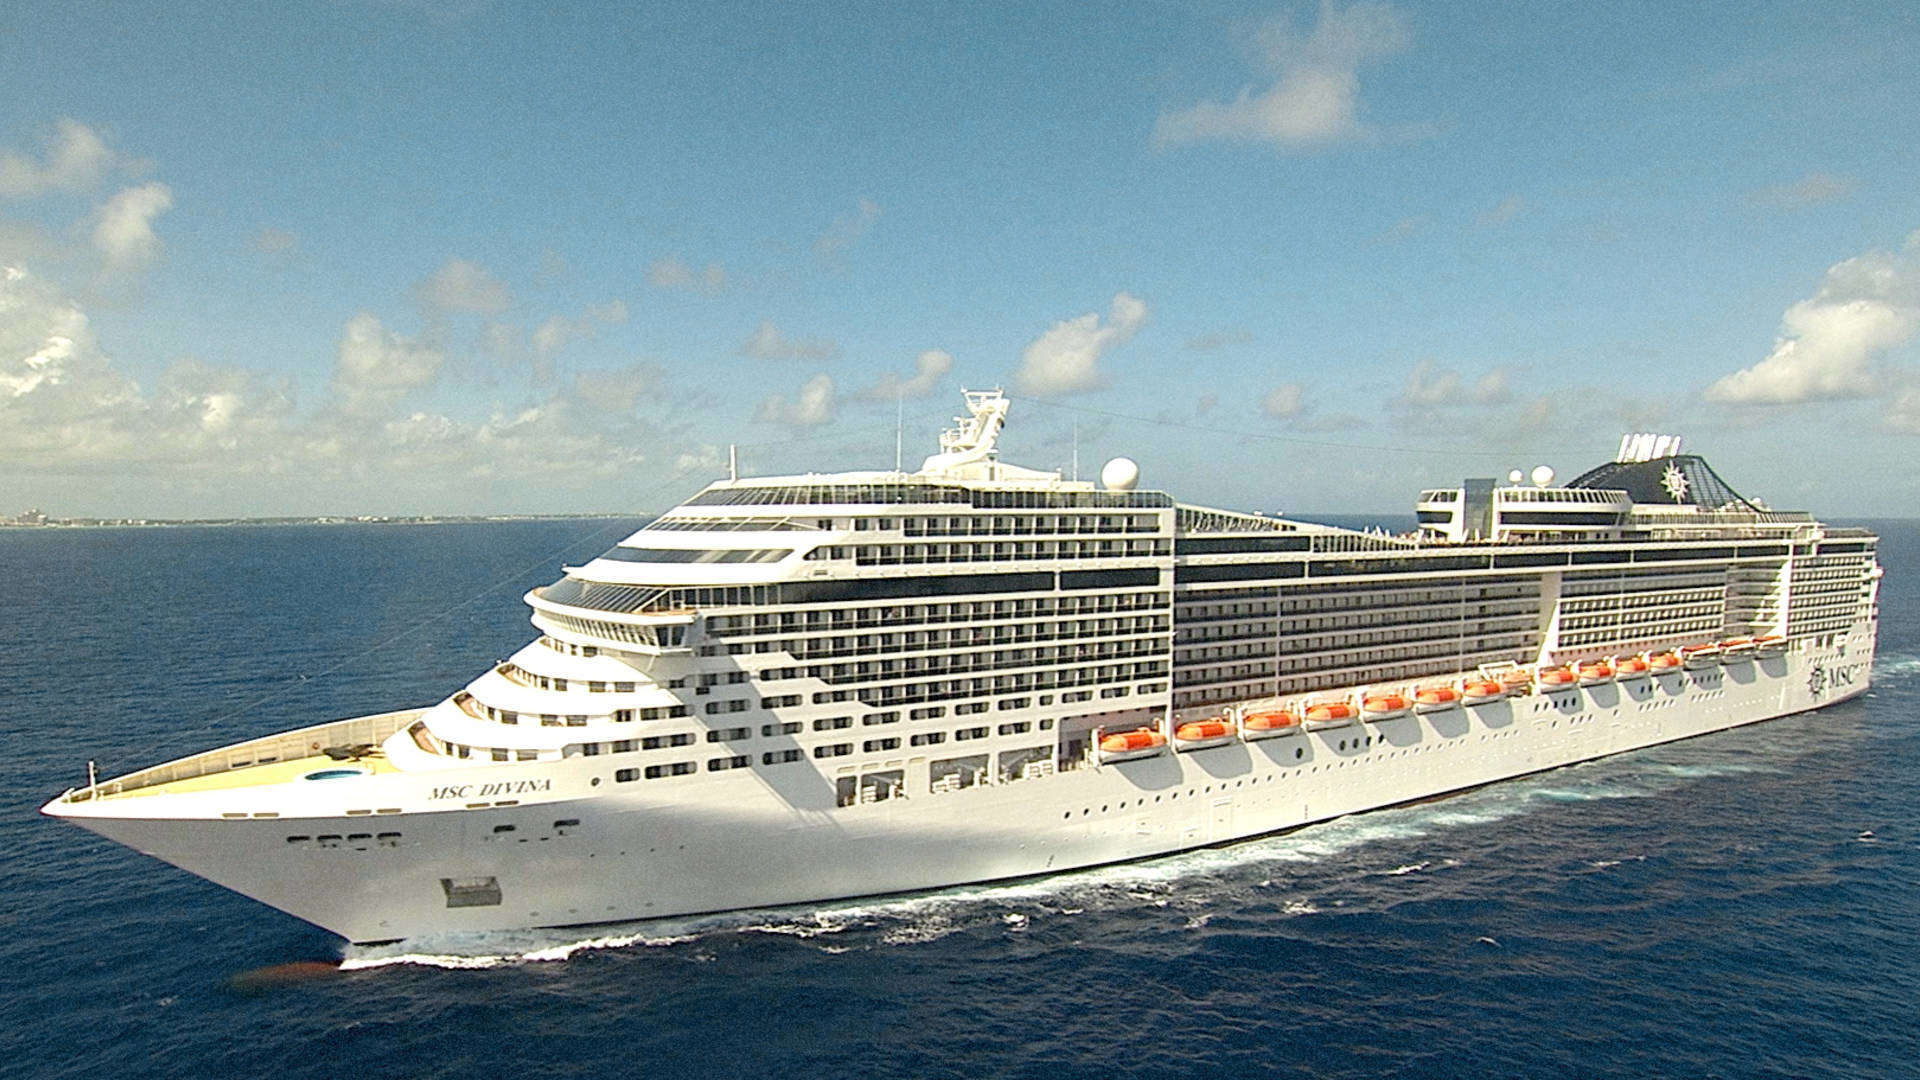 Watch Mighty Cruise Ships Season 2 Episode 6: MSC Divina - Full show on